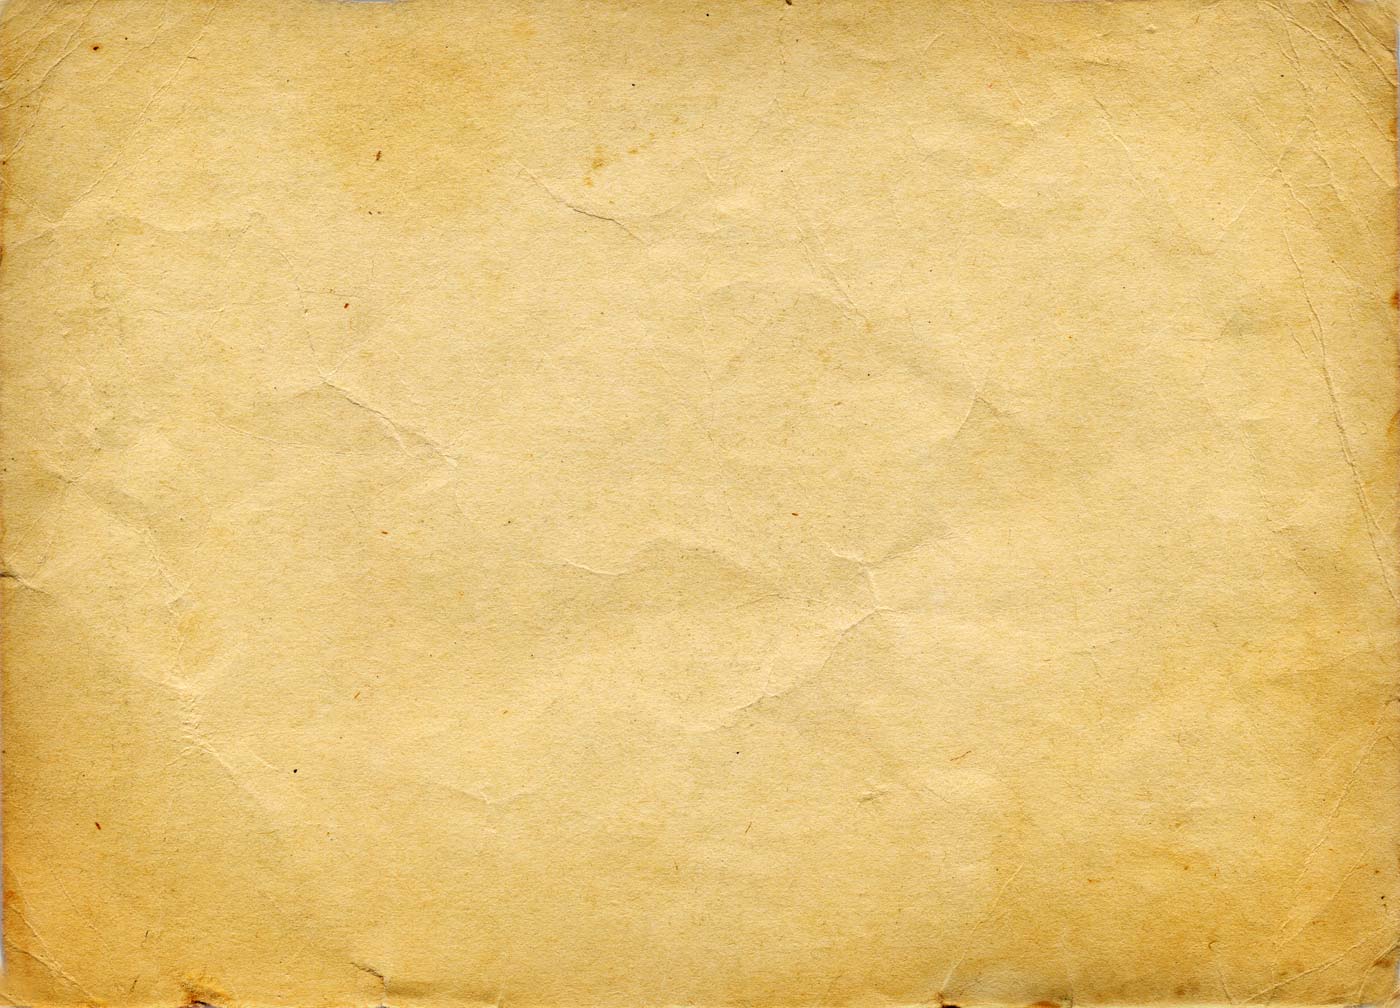 here is a free old brown parchment paper texture